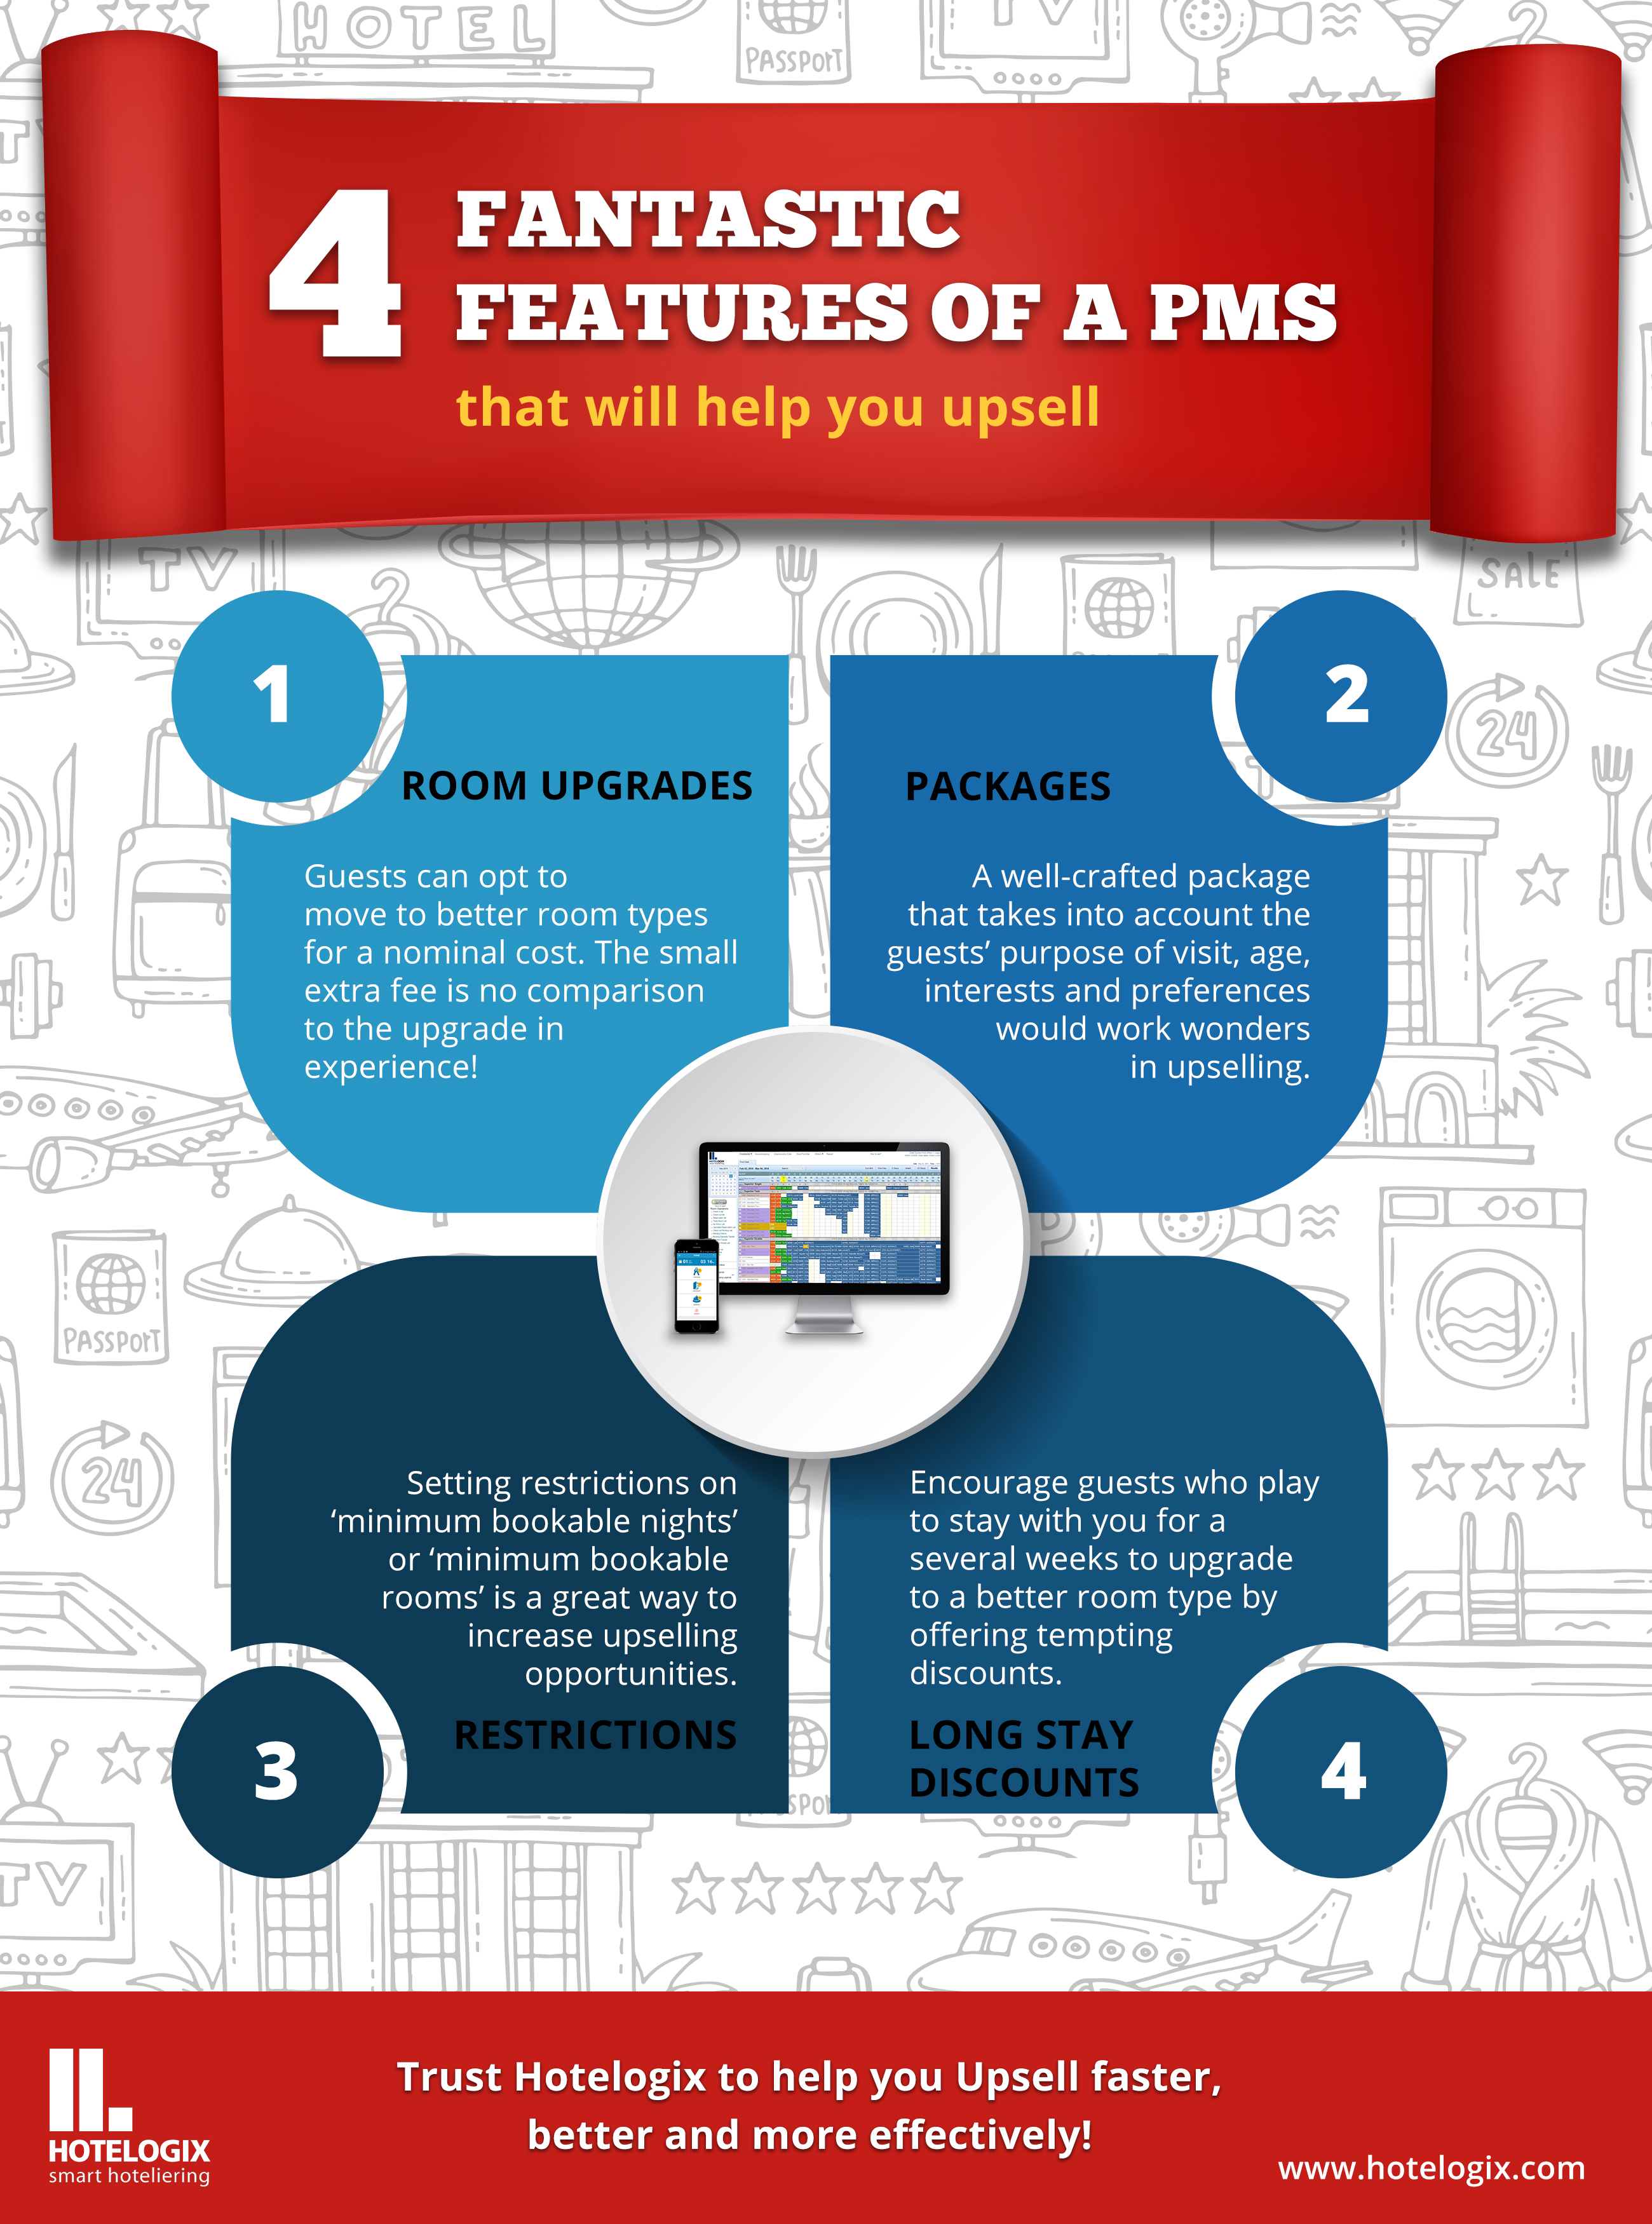 Right PMS helps to upsell better